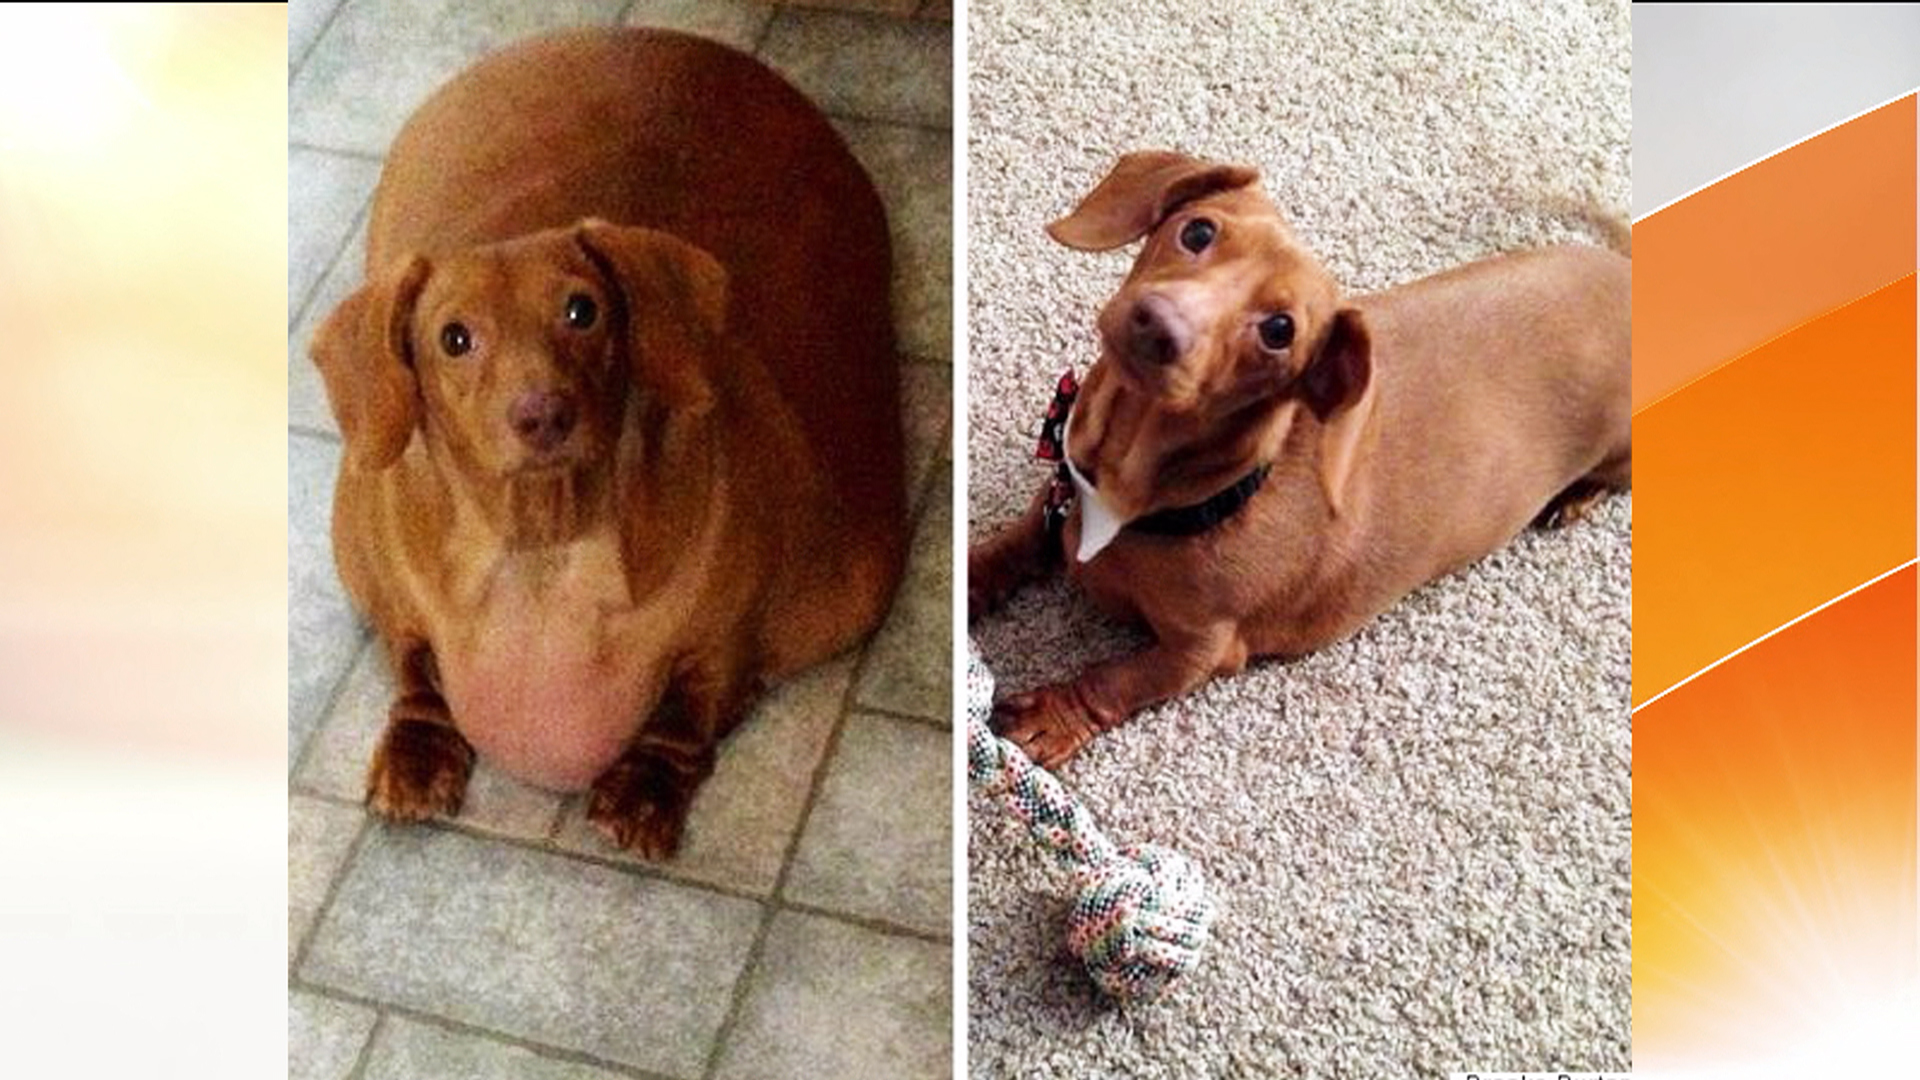 dachshund on a diet: obese ohio pup loses 80 percent of body weight